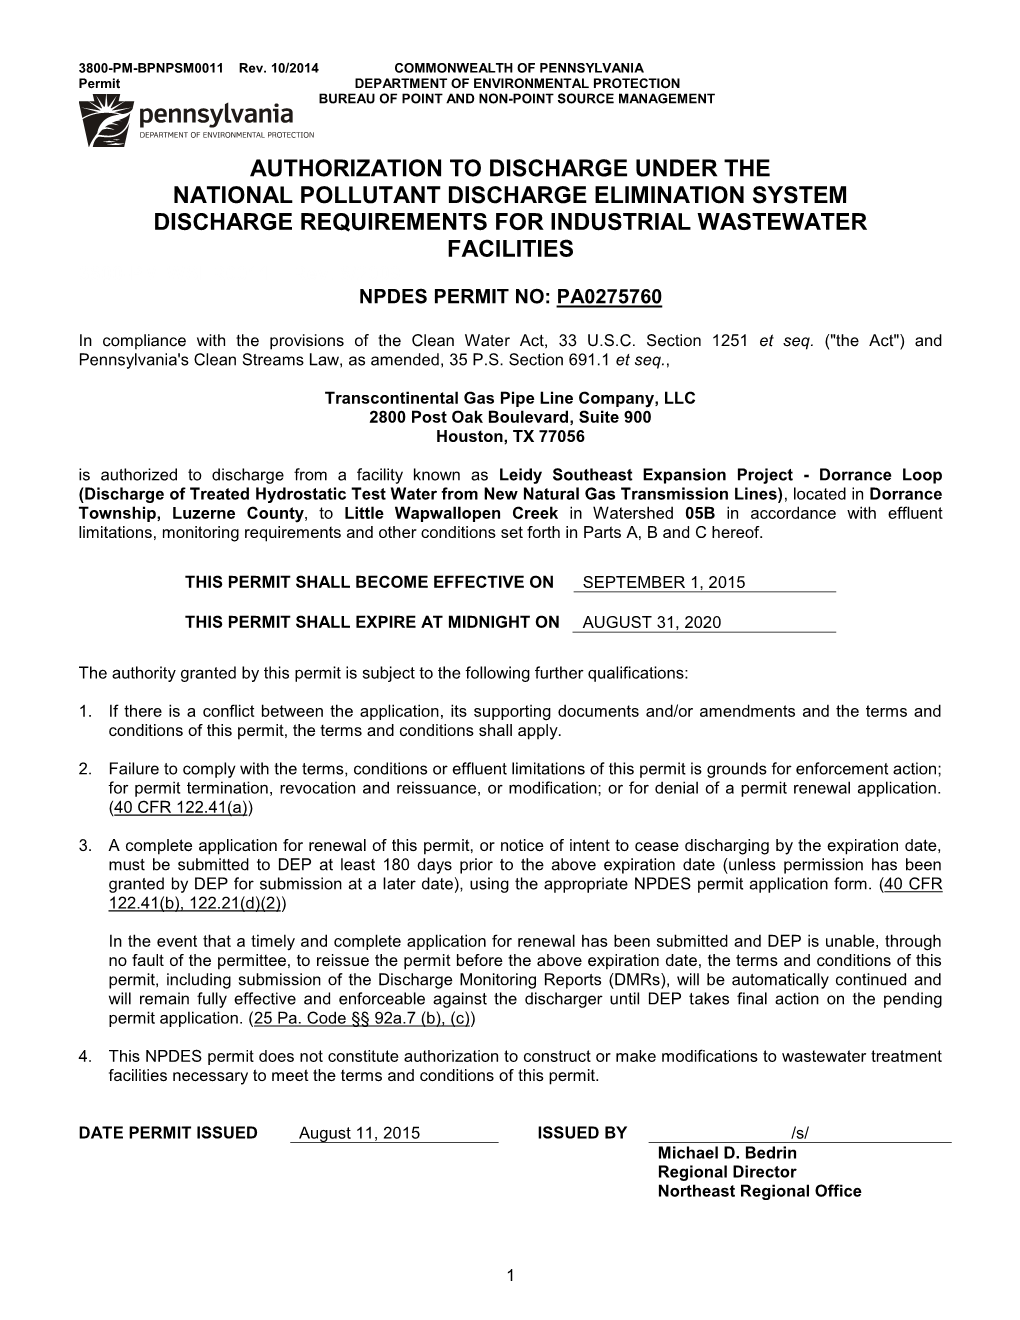 AUTHORIZATION to DISCHARGE UNDER the NATIONAL POLLUTANT DISCHARGE ELIMINATION SYSTEM DISCHARGE REQUIREMENTS for INDUSTRIAL WASTEWATER FACILITIES 3800-PM-WSFR0011 Rev